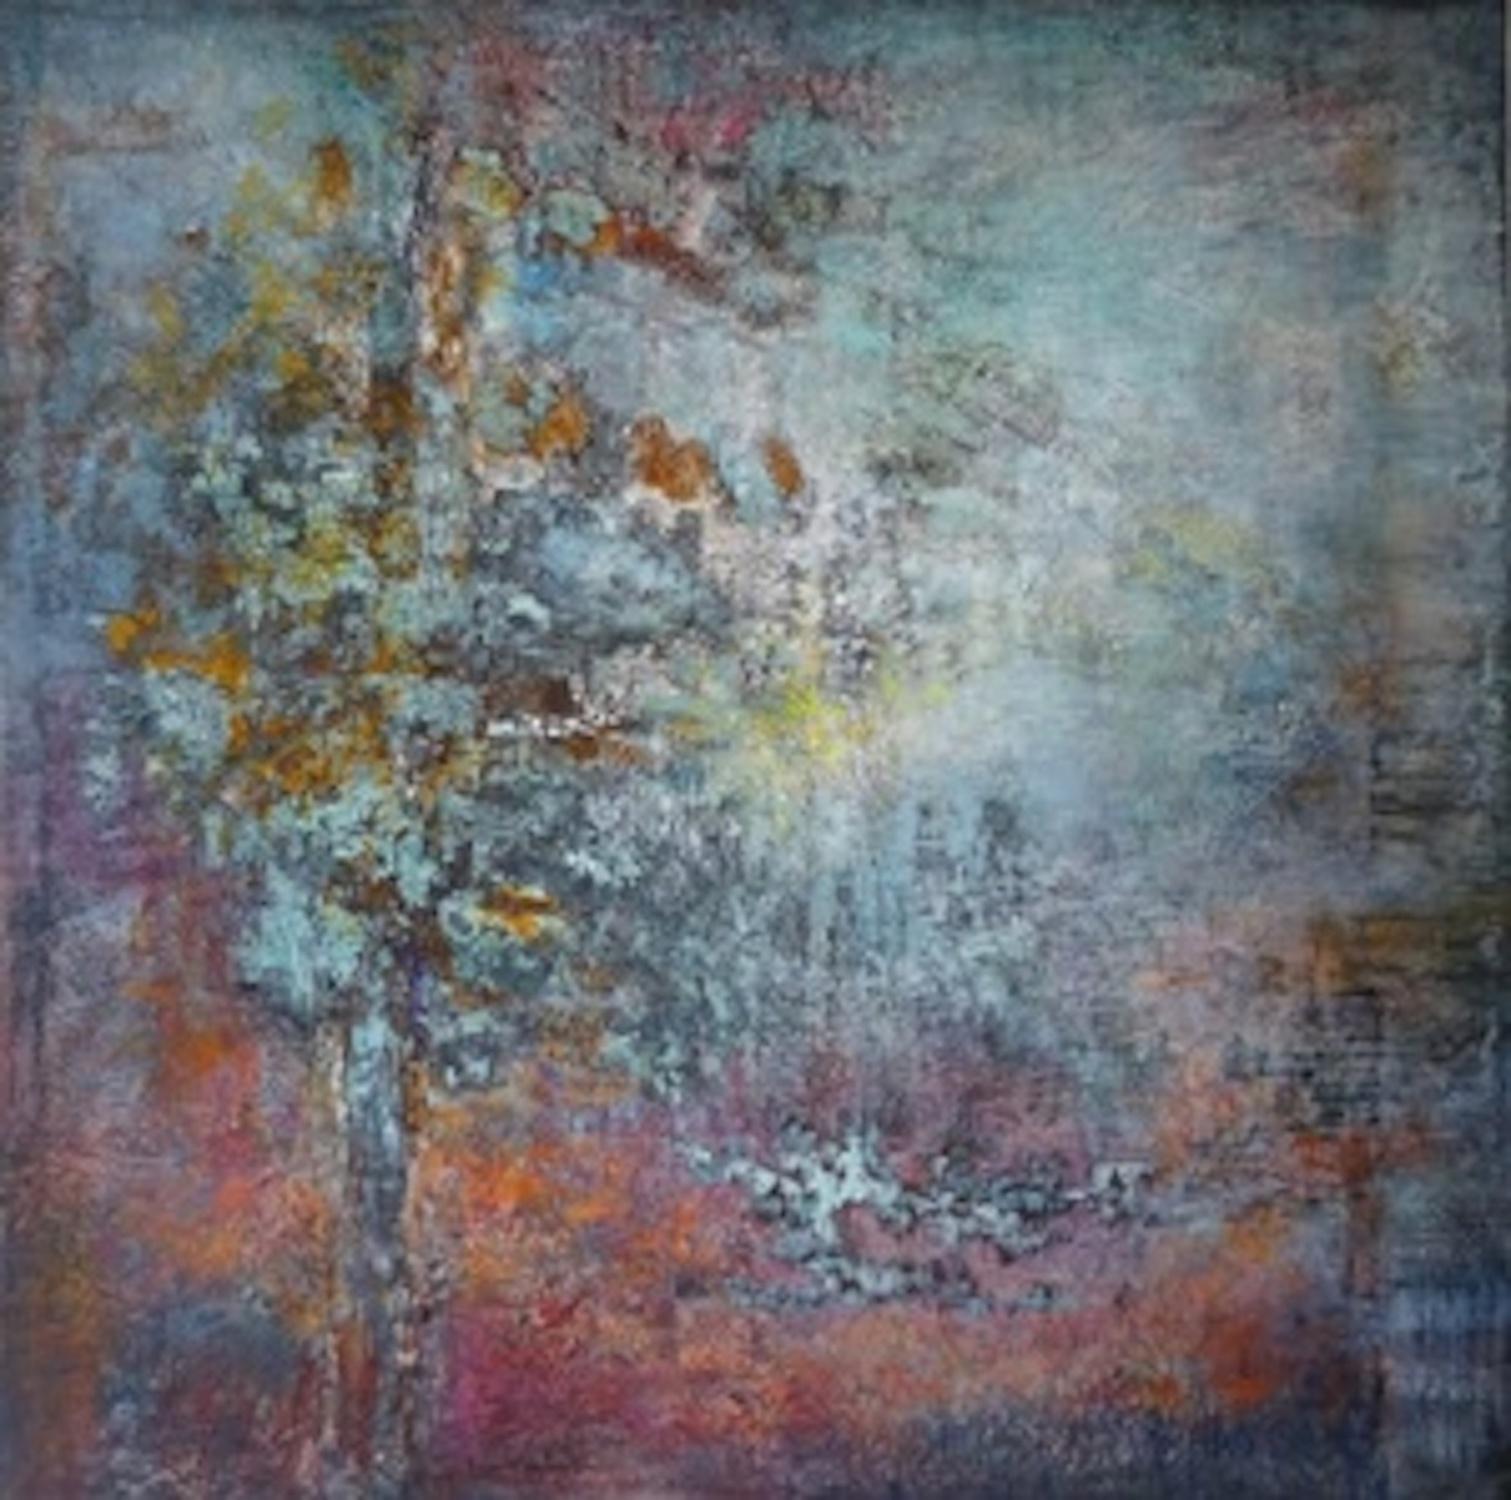 Emmanuelle Vroelant Abstract Painting - "Blue Clearing" abstract acrylic on linen canvas 80x80cm 2015